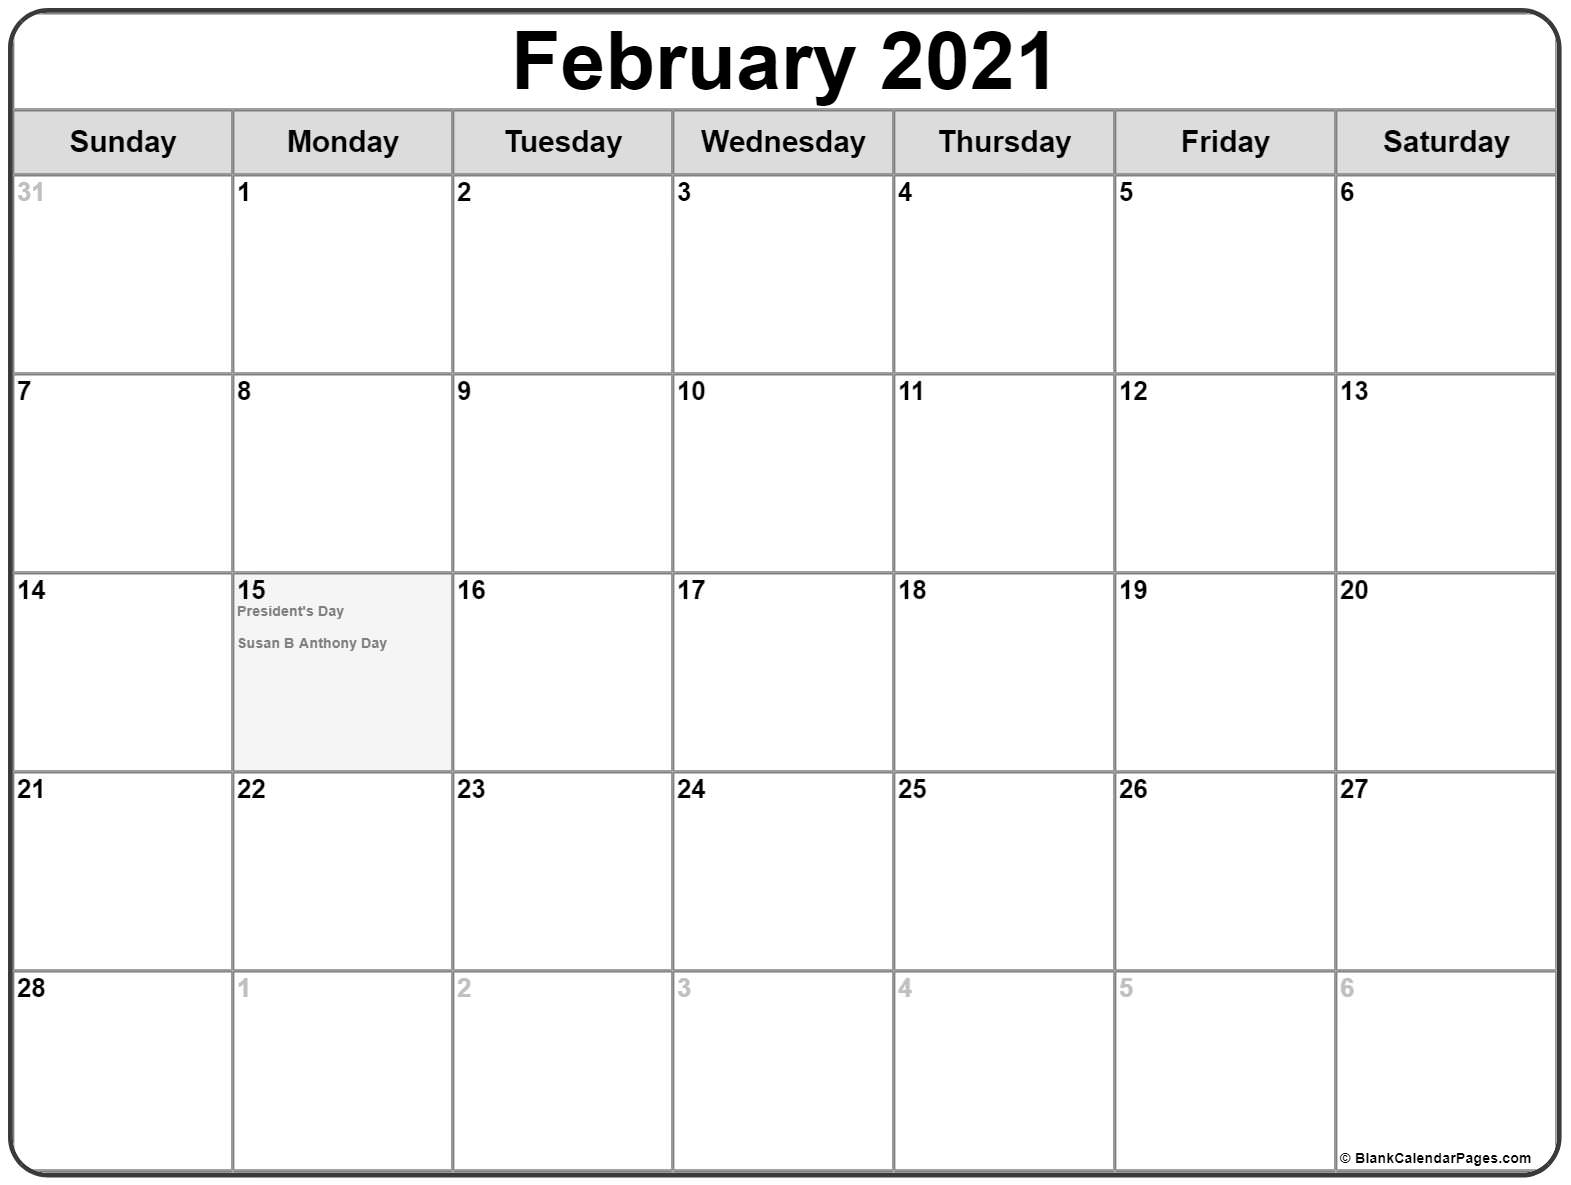 collection of february 2021 calendars with holidays